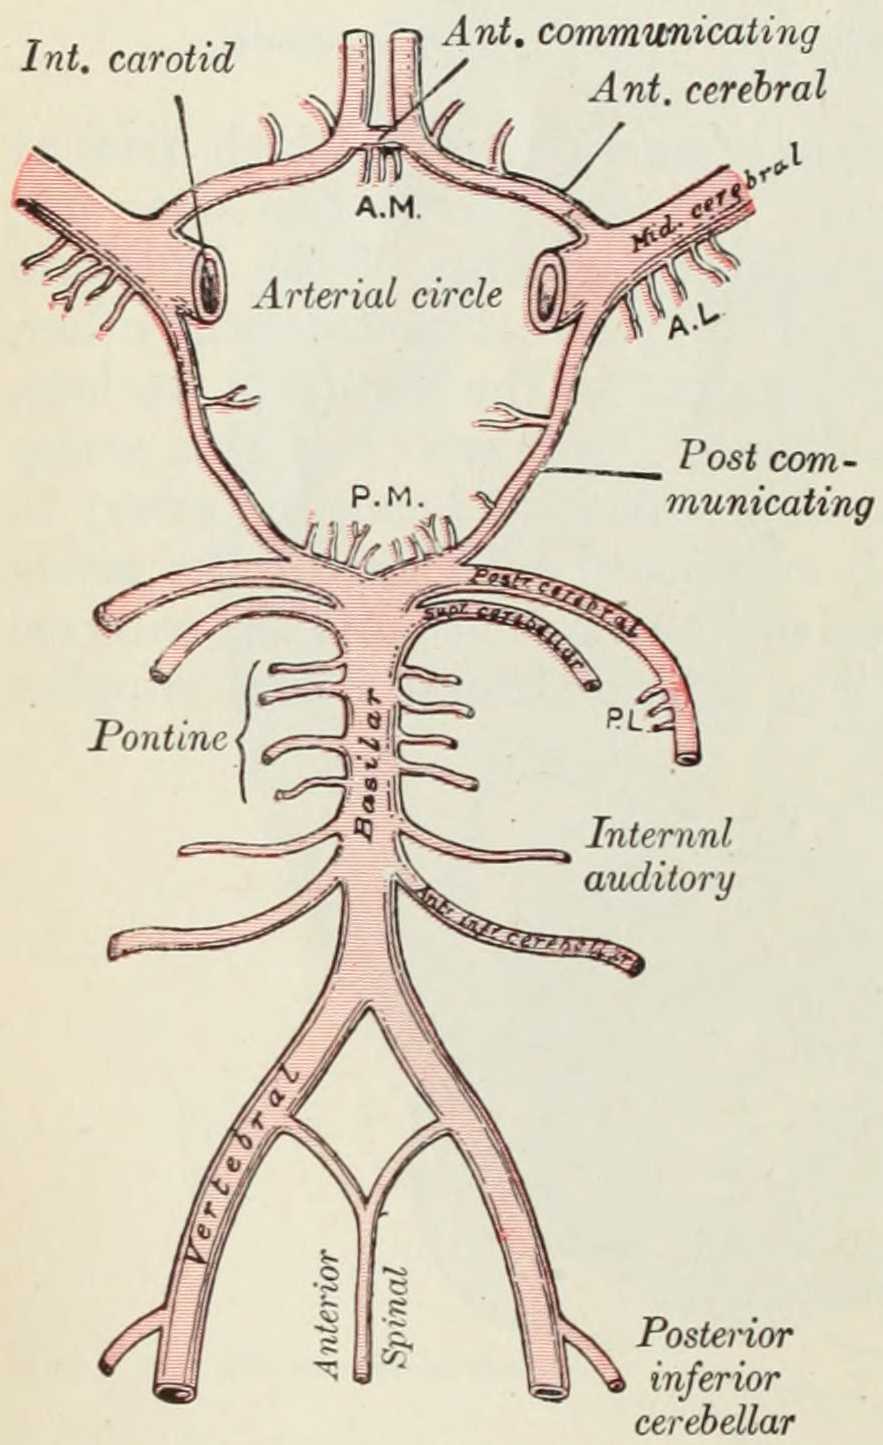 Diagram of the arterial circulation at the base of the brain. A.L. Antero-lateral. A.M. Antero-medial.P.L. Postero-lateral. P.M. Postero-medial ganglionic branches. From Gray Henry, Anatomy of the Human Body. 20th Edition, Lea & Febiger, Philadelphia & New York, 1918